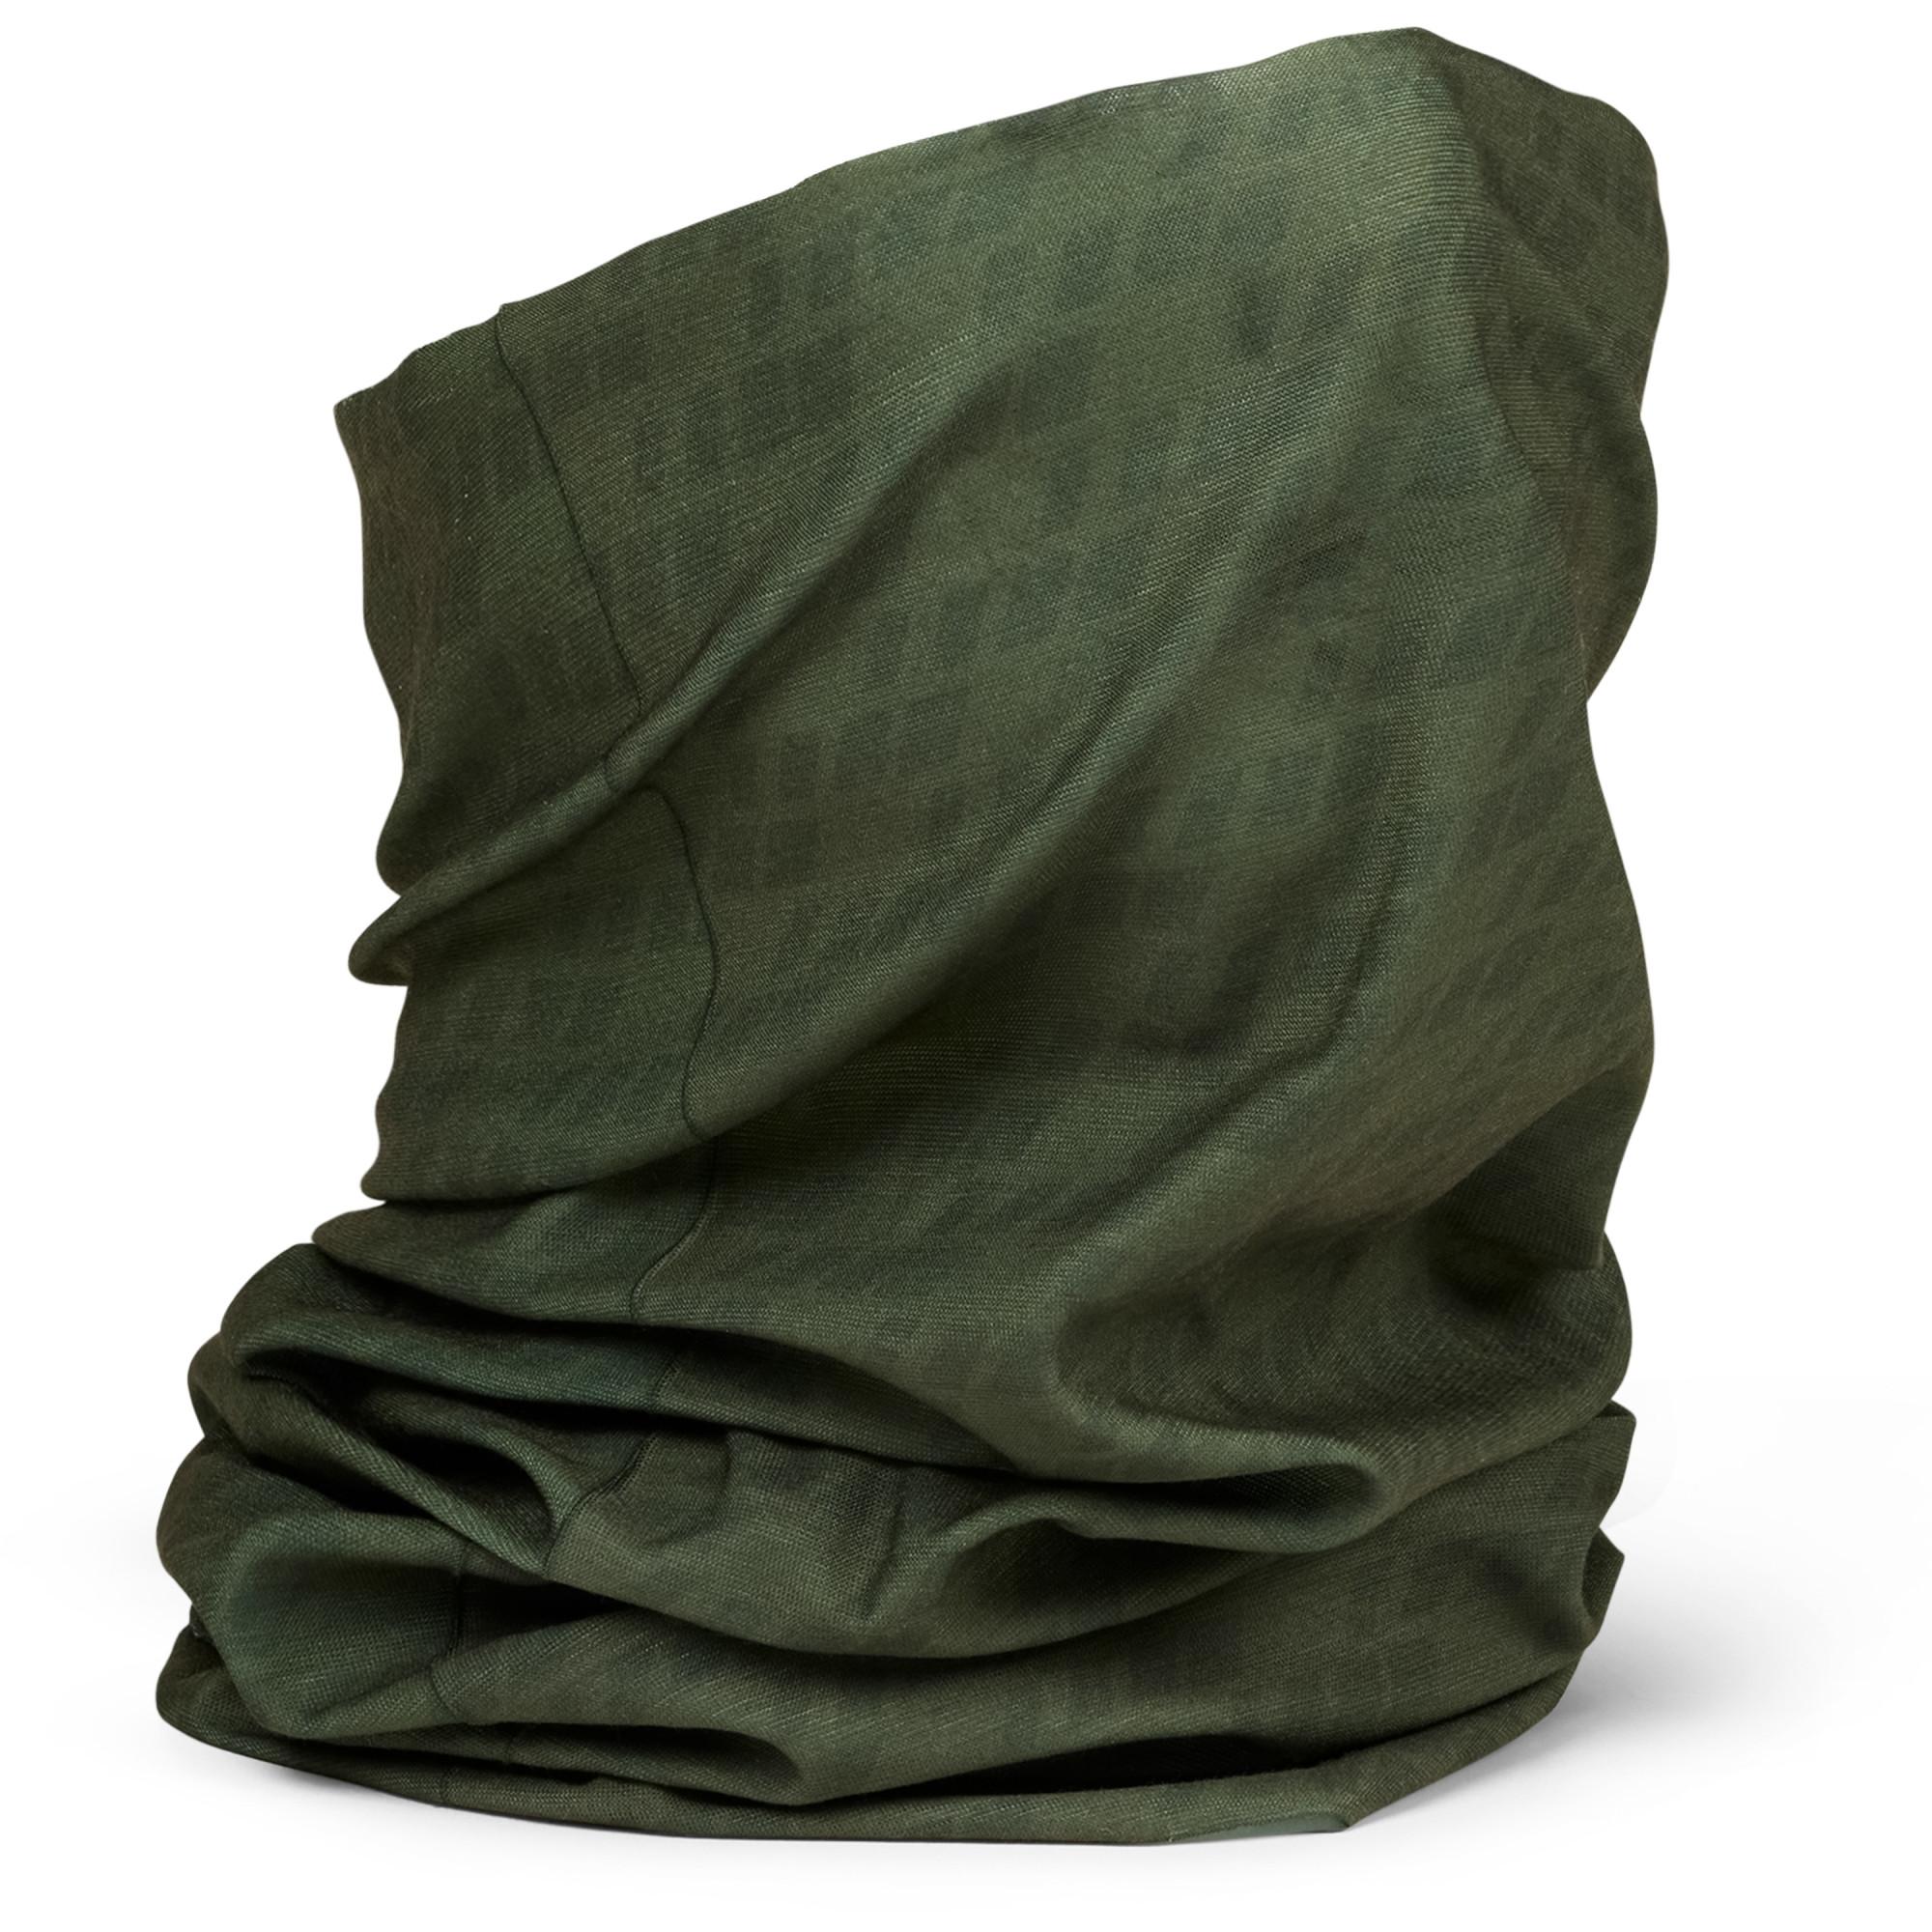 Gripgrab Multifunctional Neck Warmer - Olive Green